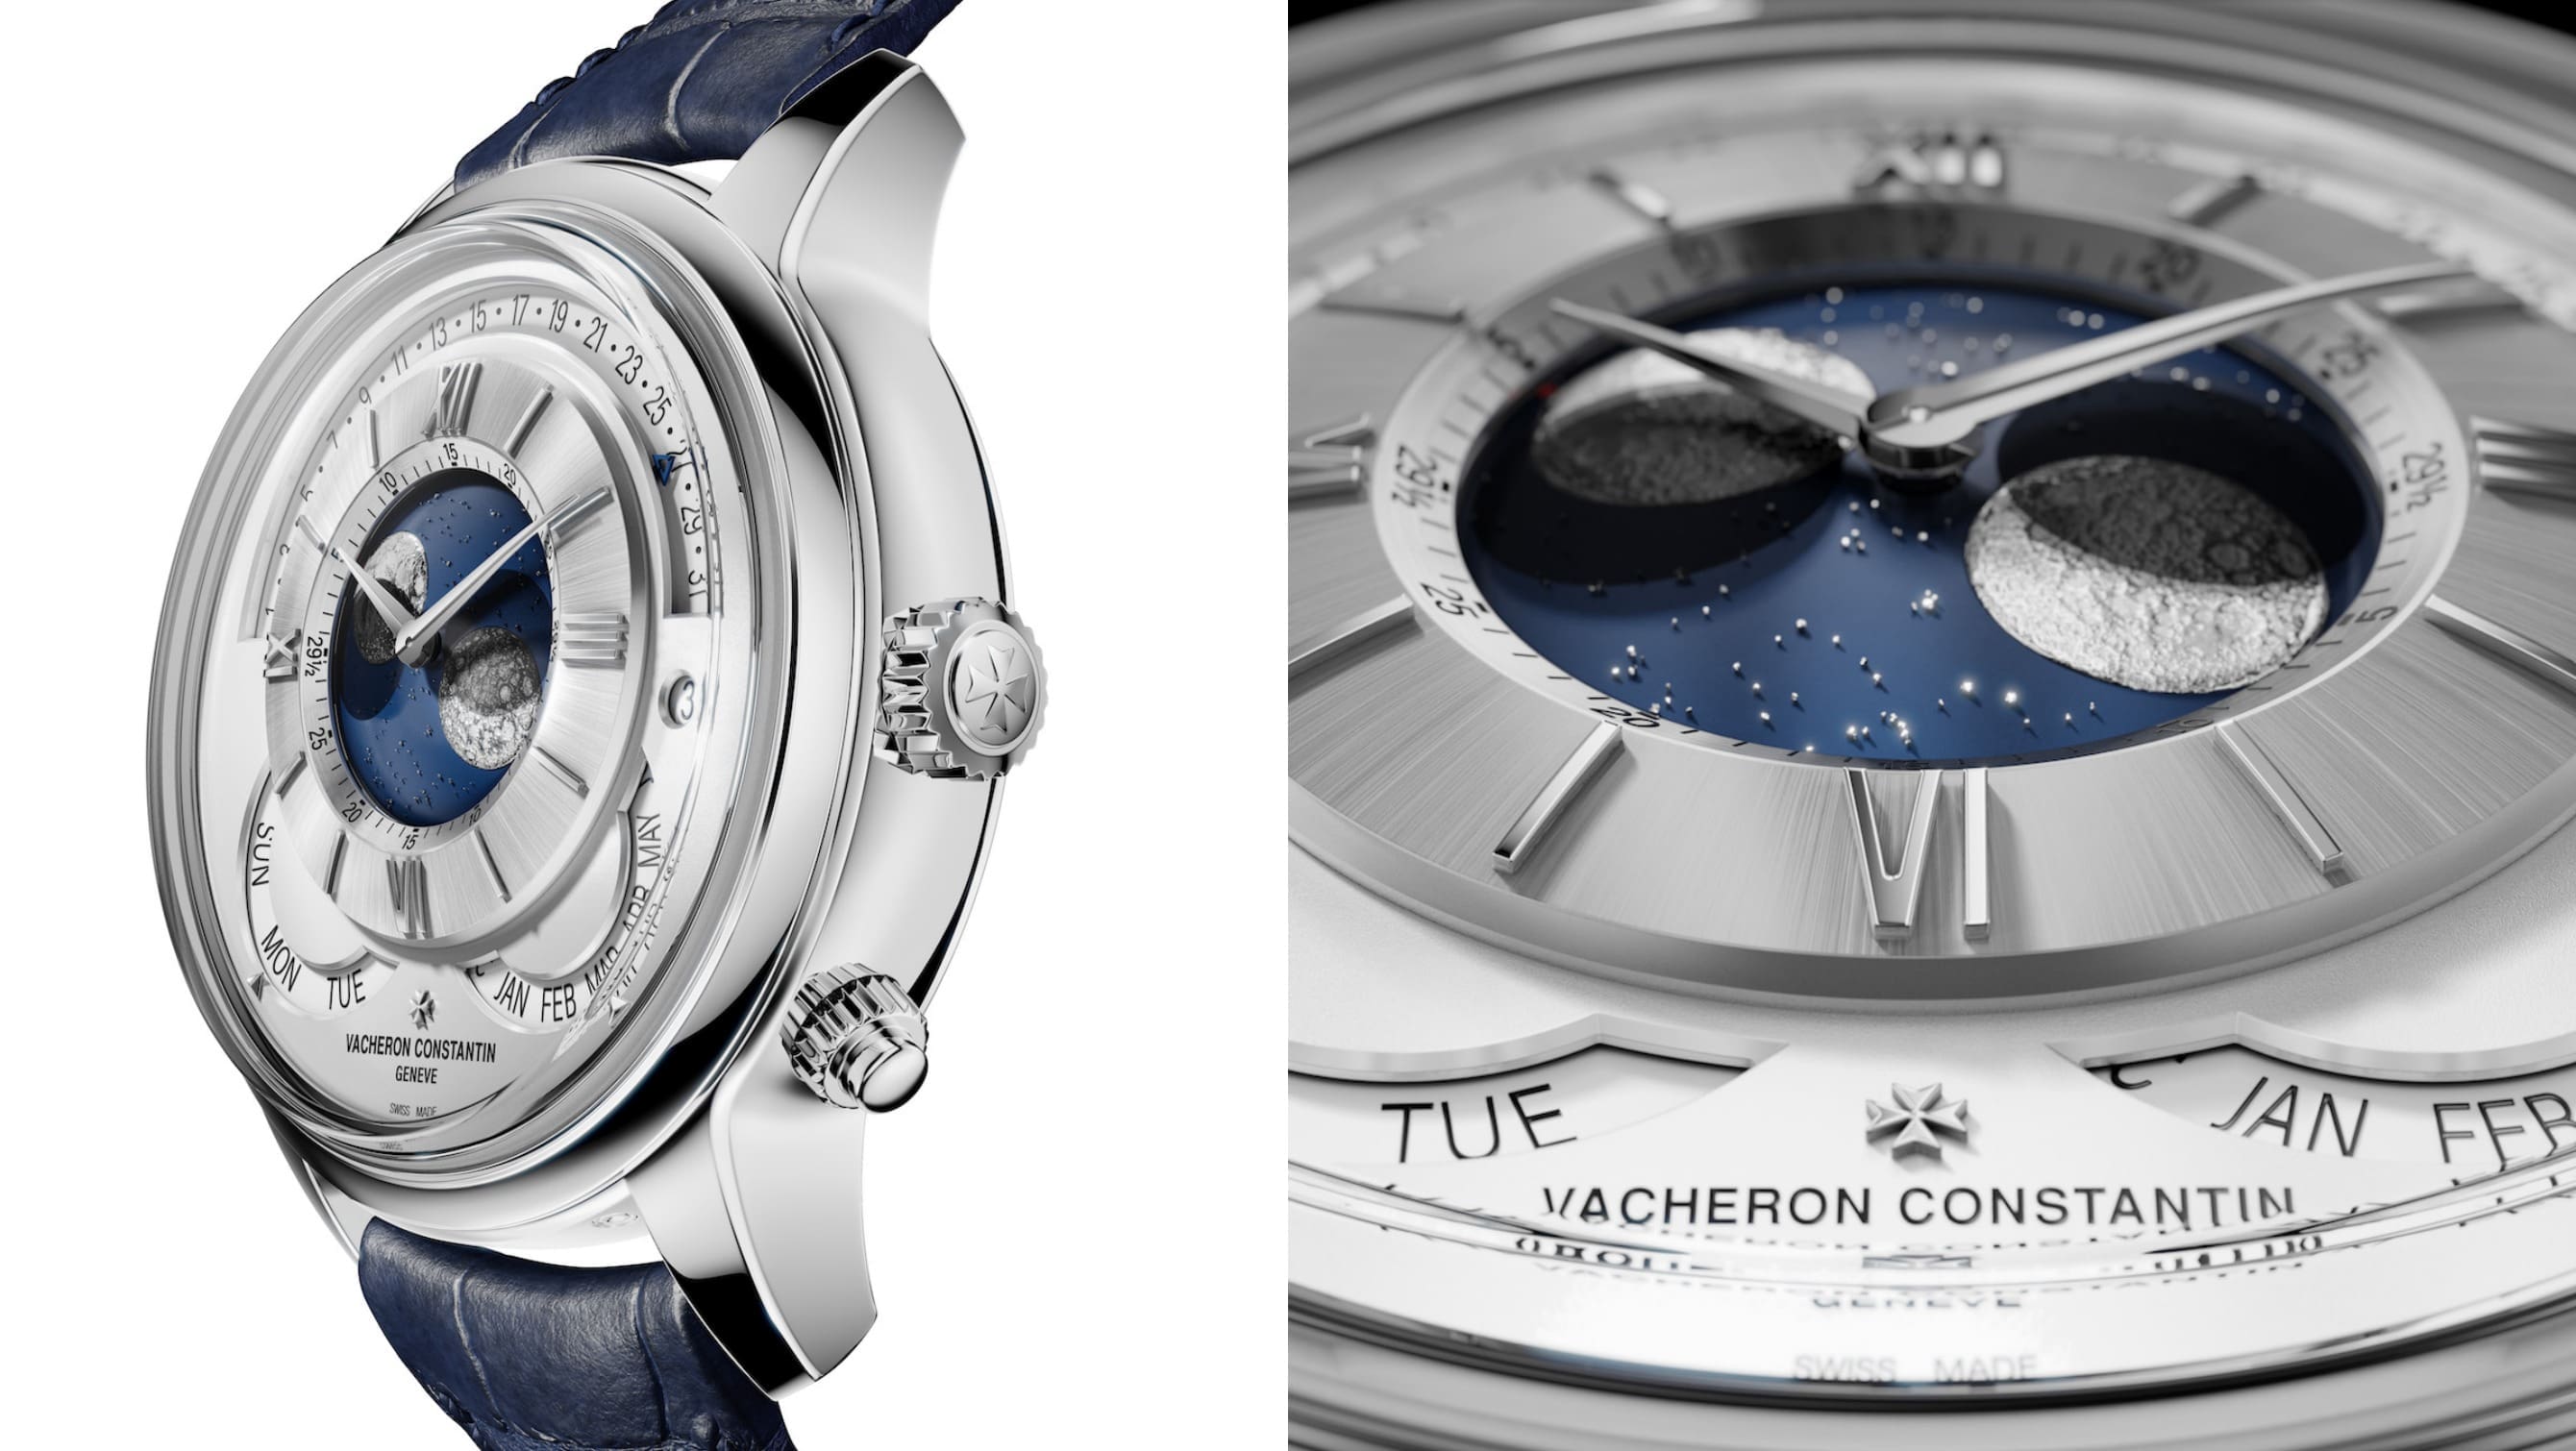 The mind-blowing majesty of the Vacheron Constantin Les Cabinotiers Dual Moon Grand Complication